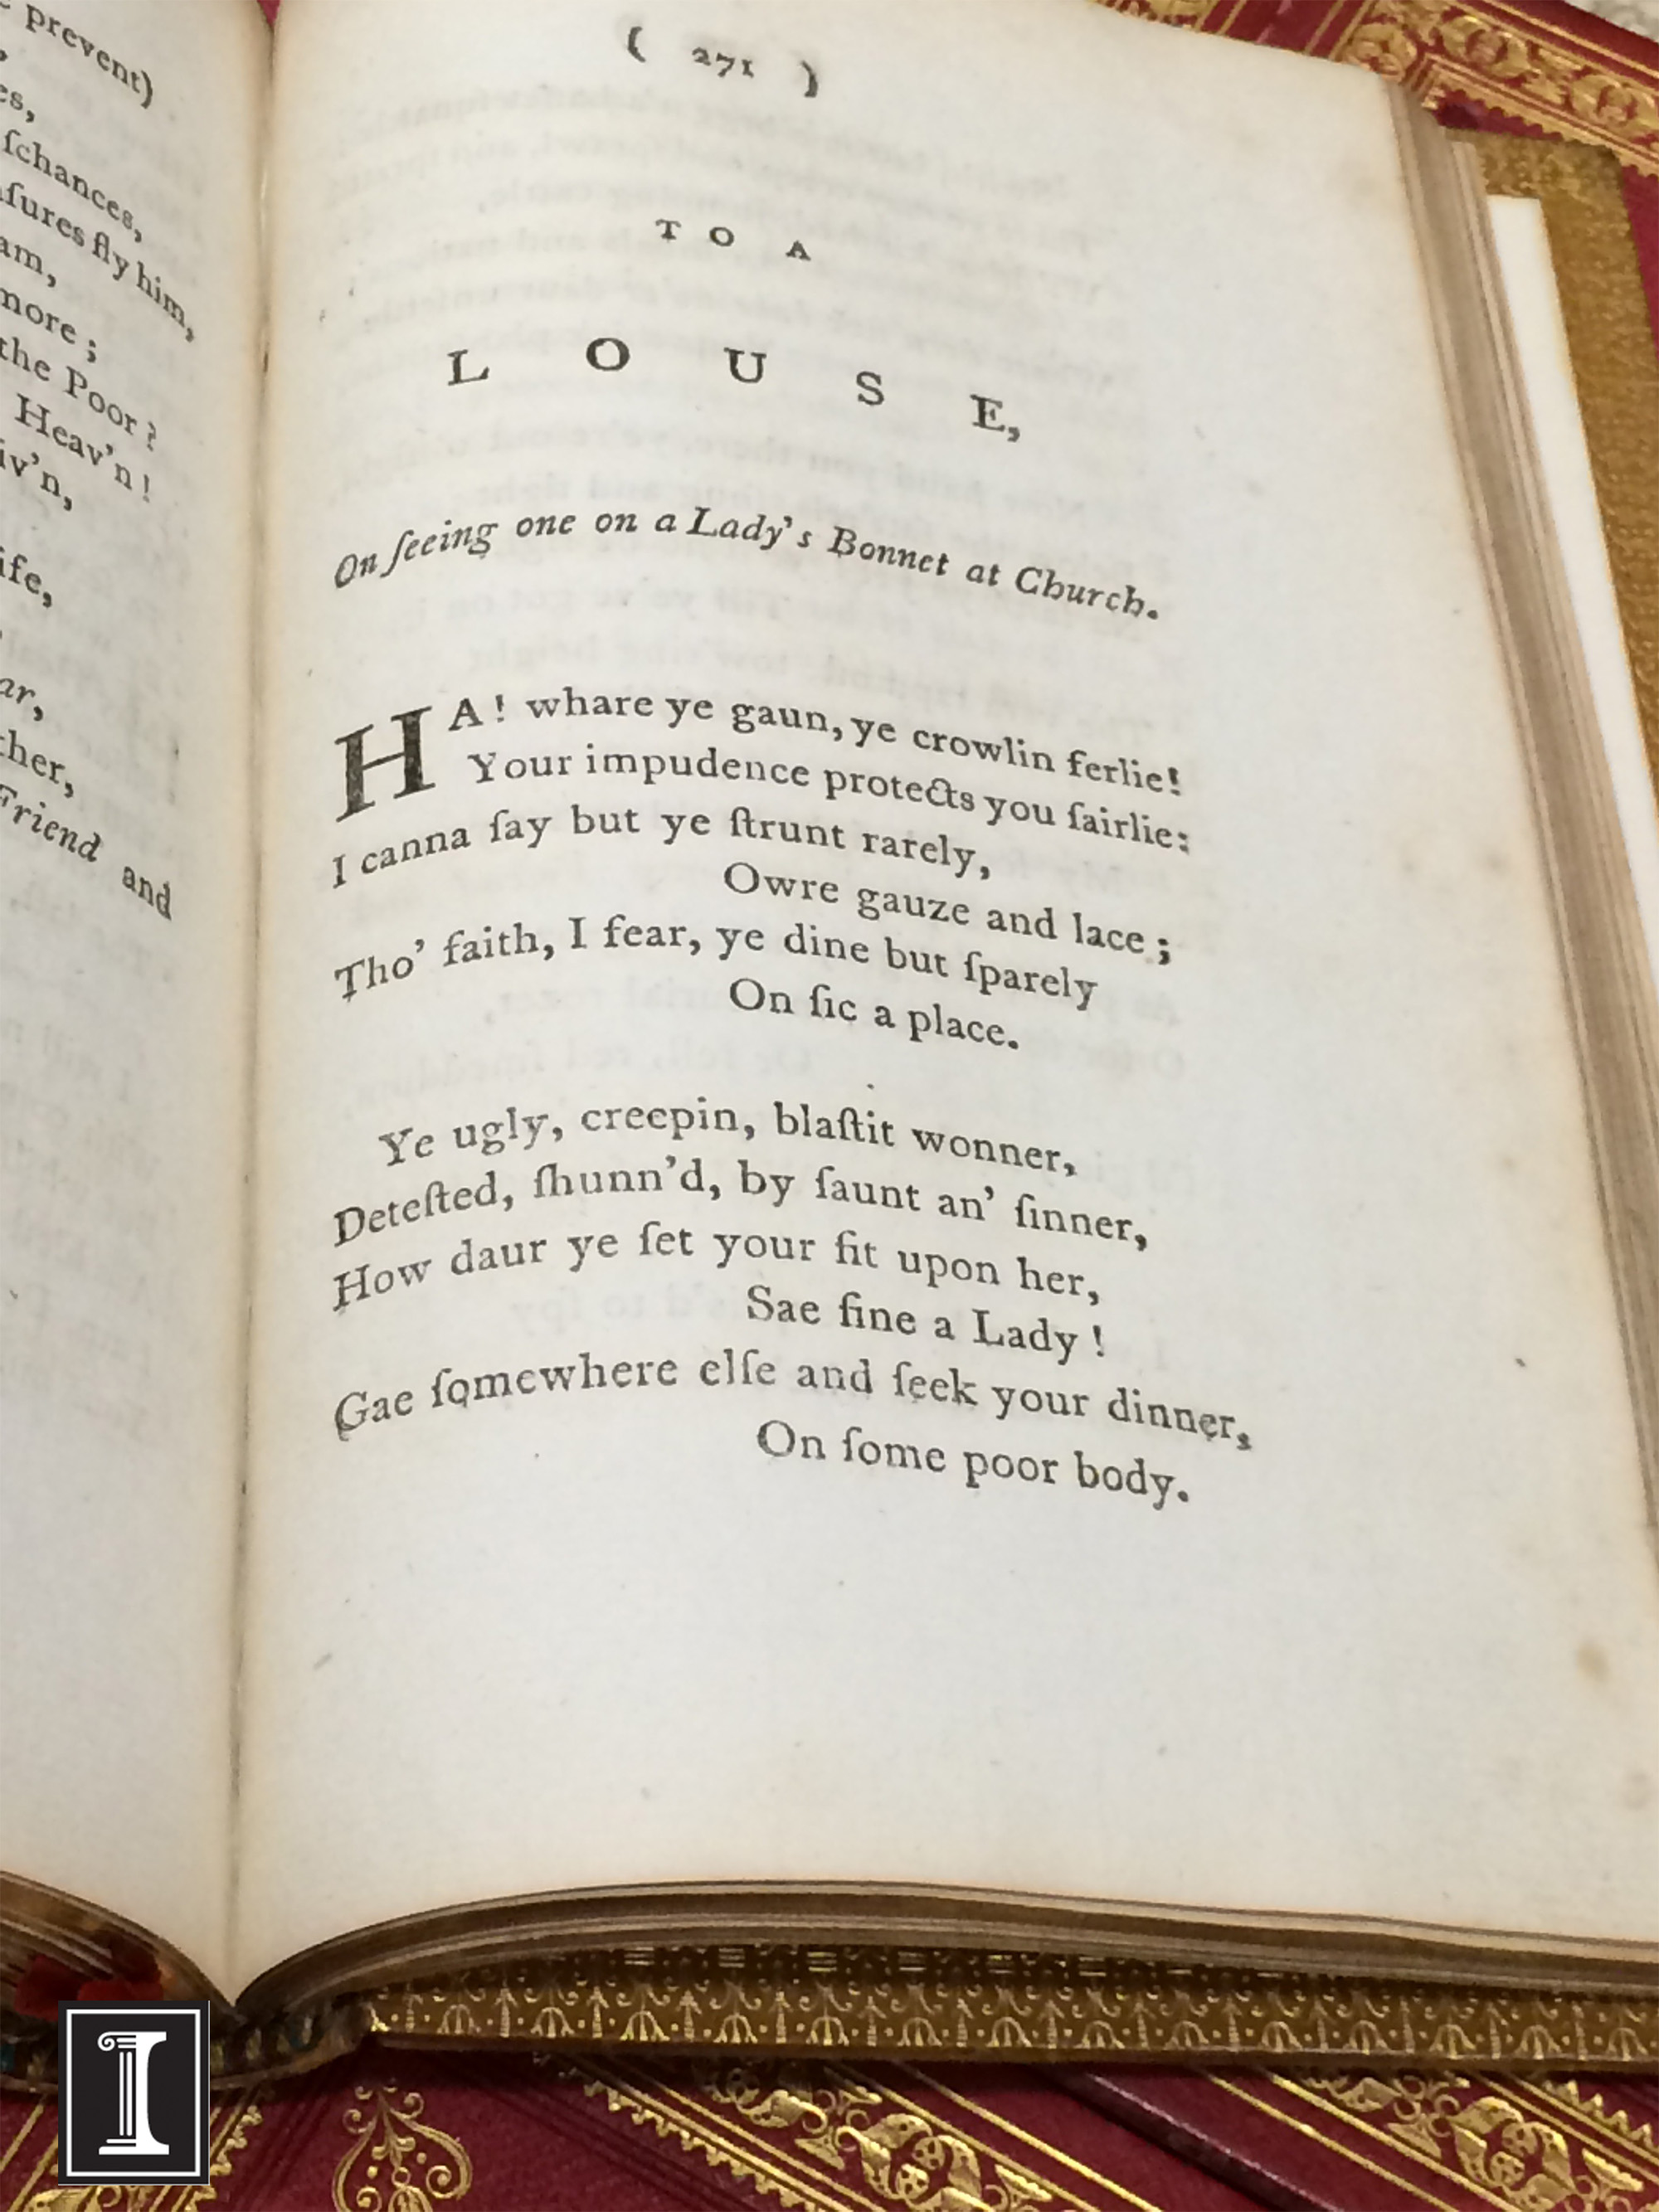 Of Lice And Men A Special Robbie Burns Day Post Rare Book And Manuscript Library U Of I Library